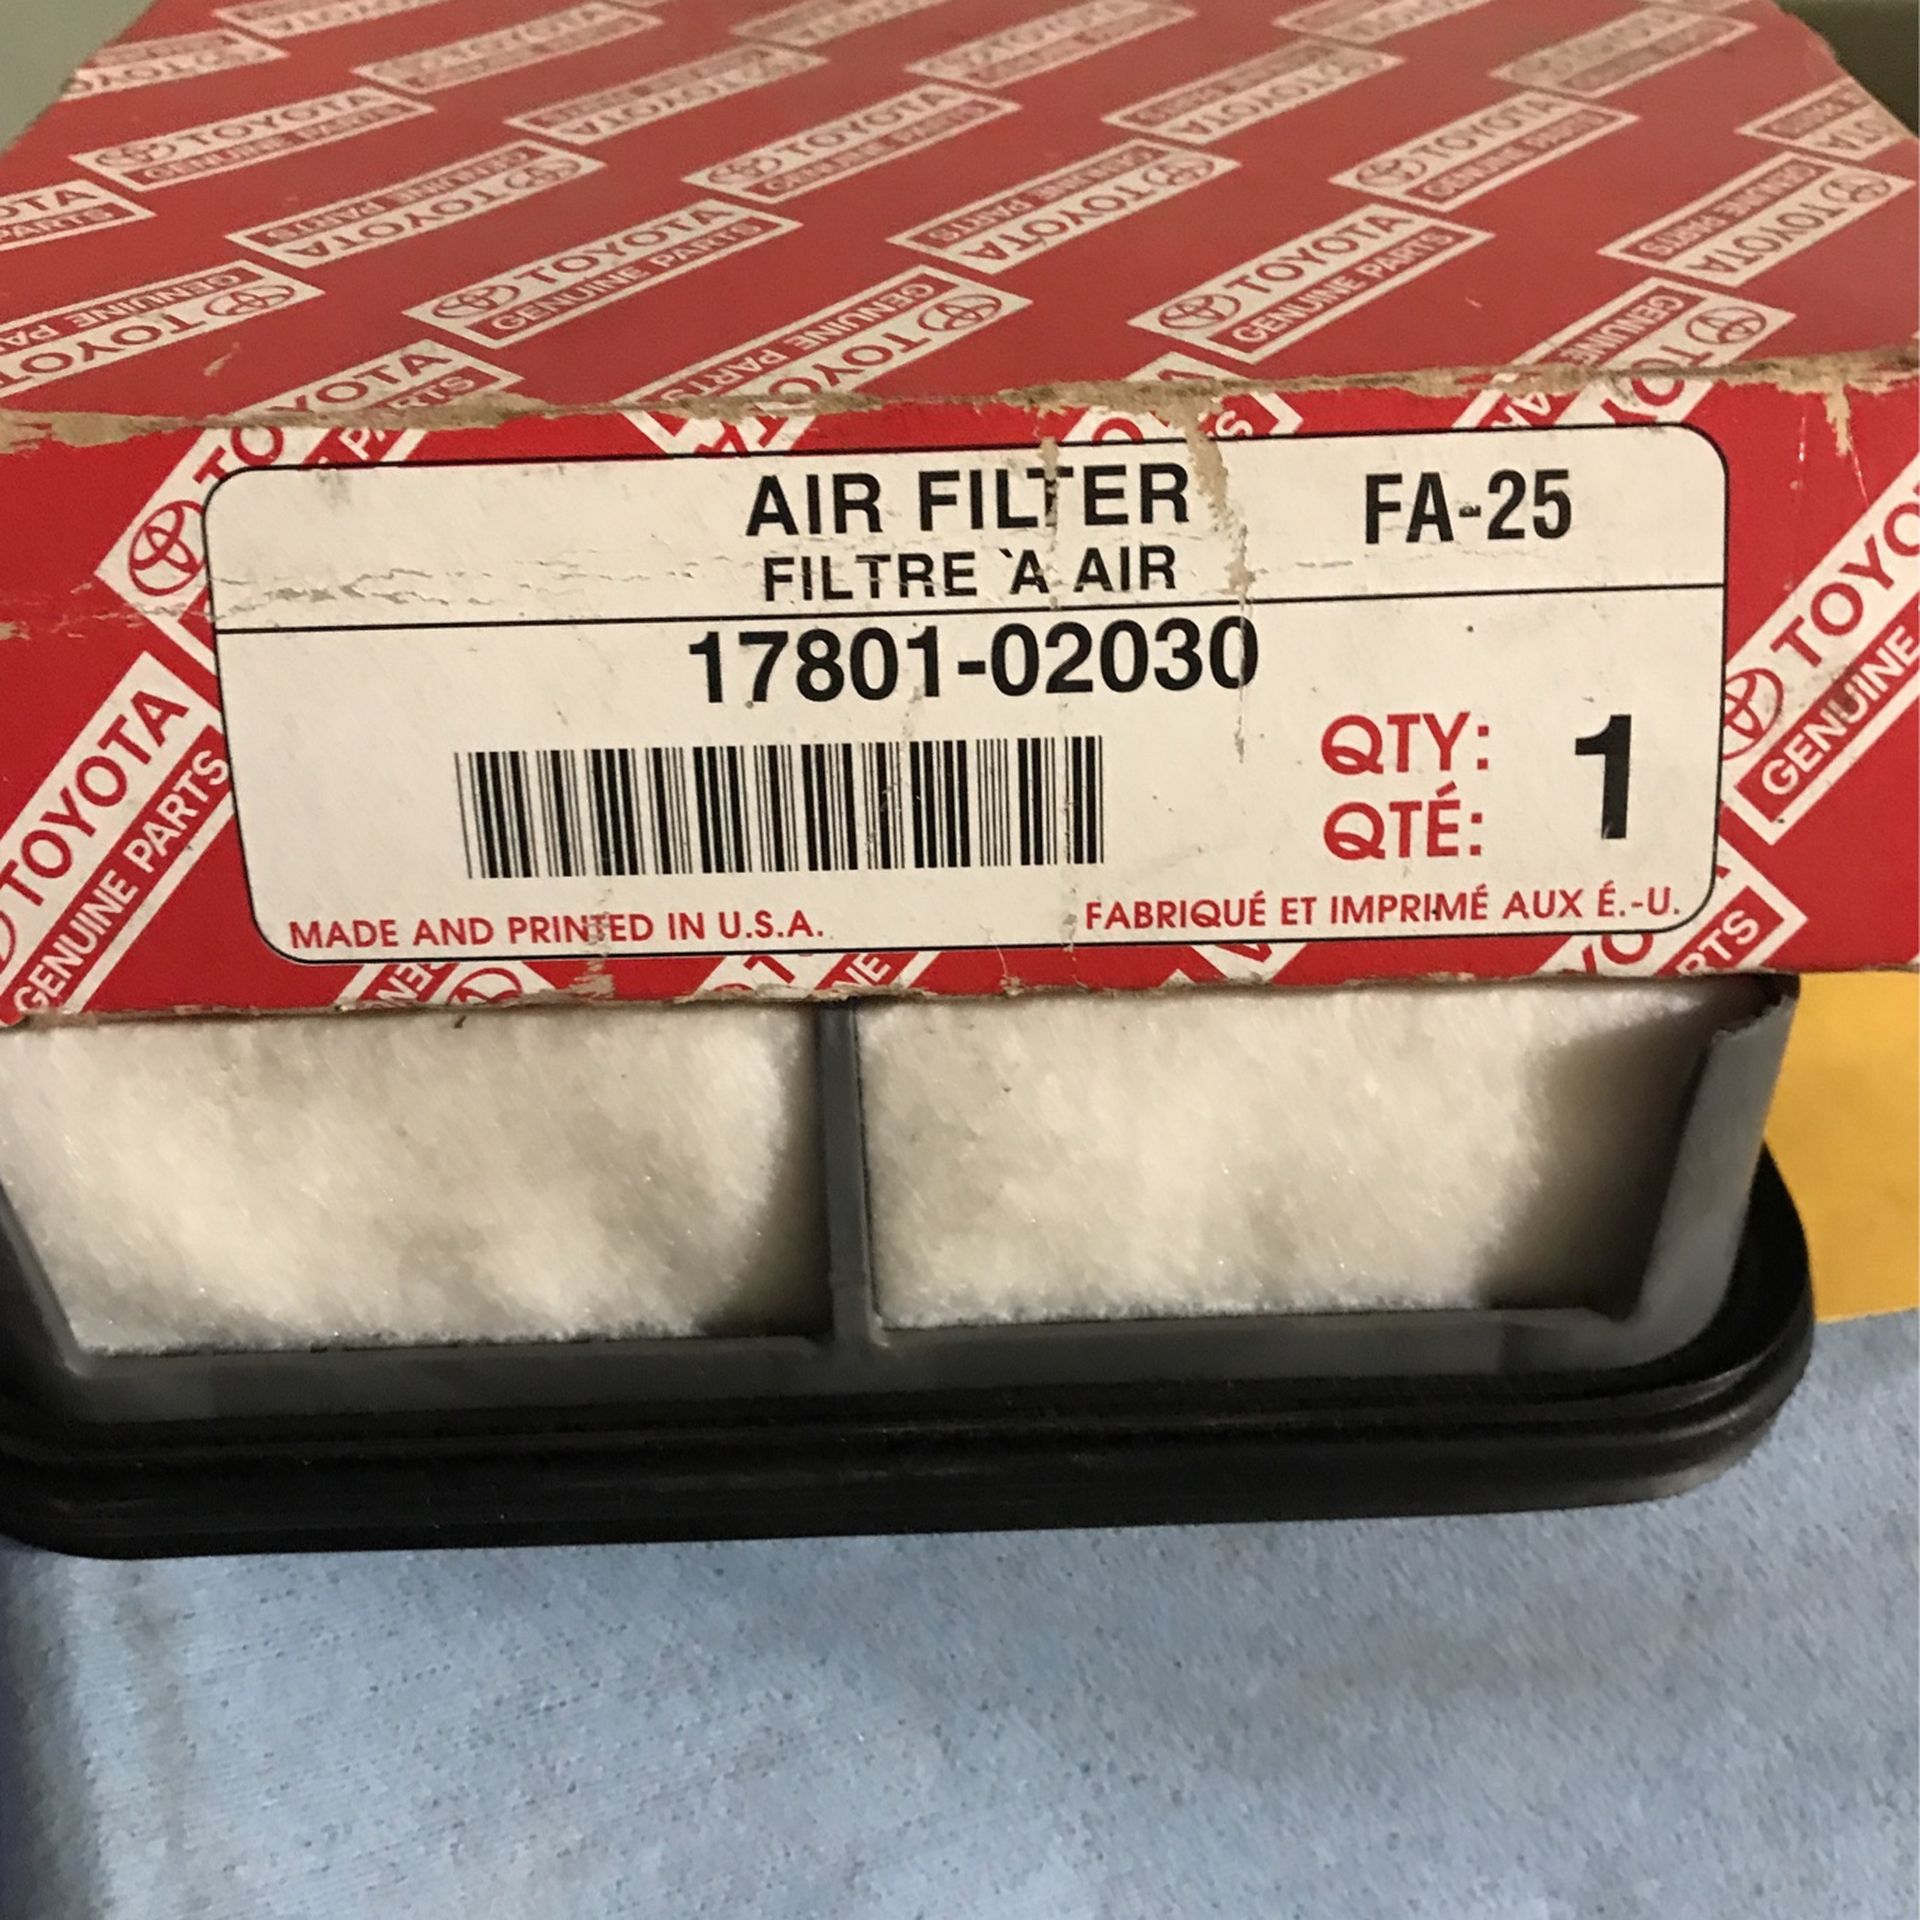 Toyota Air Filter Part#17(contact info removed)0